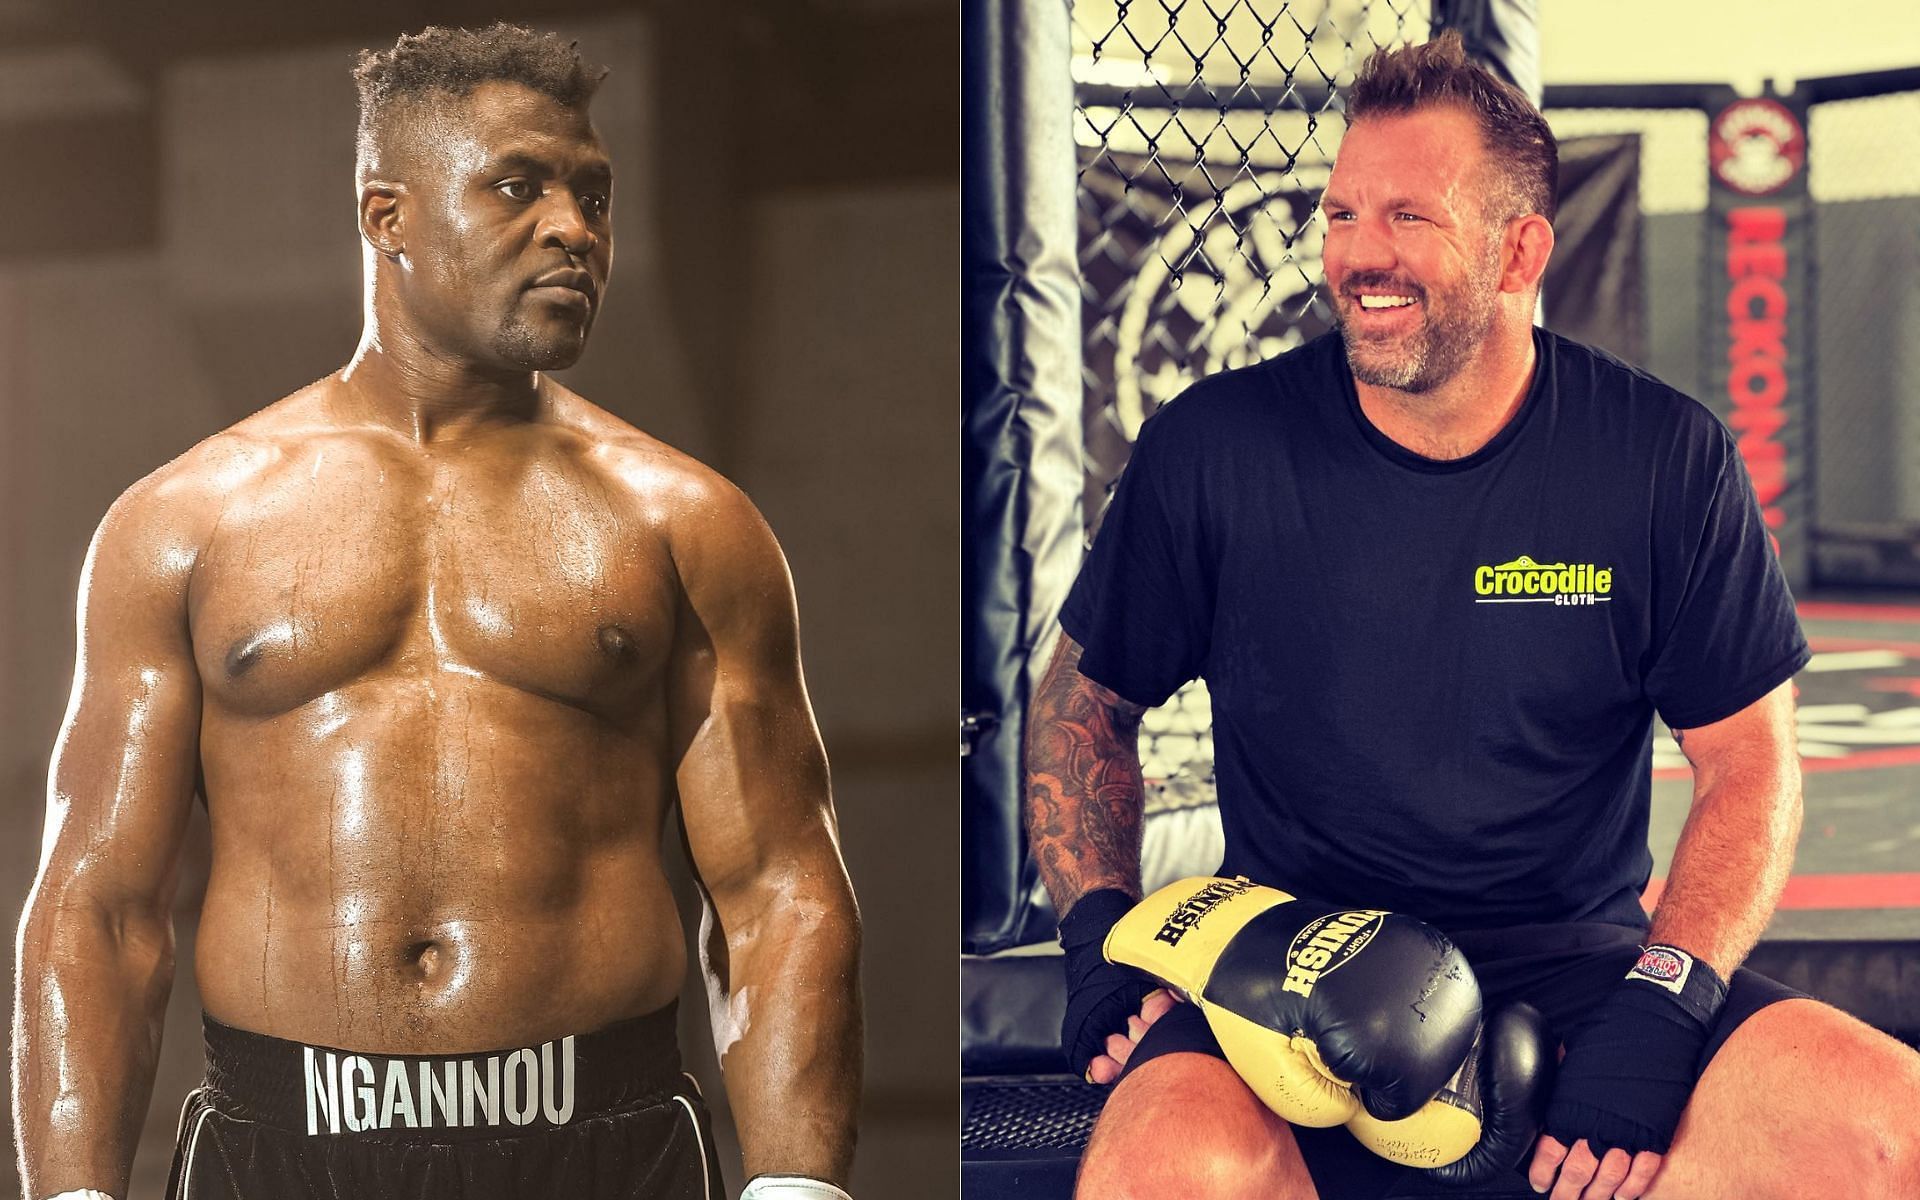 Could Francis Ngannou face Ryan Bader in the future? [Image Credit: @francisngannou and @ryanbader on Instagram]